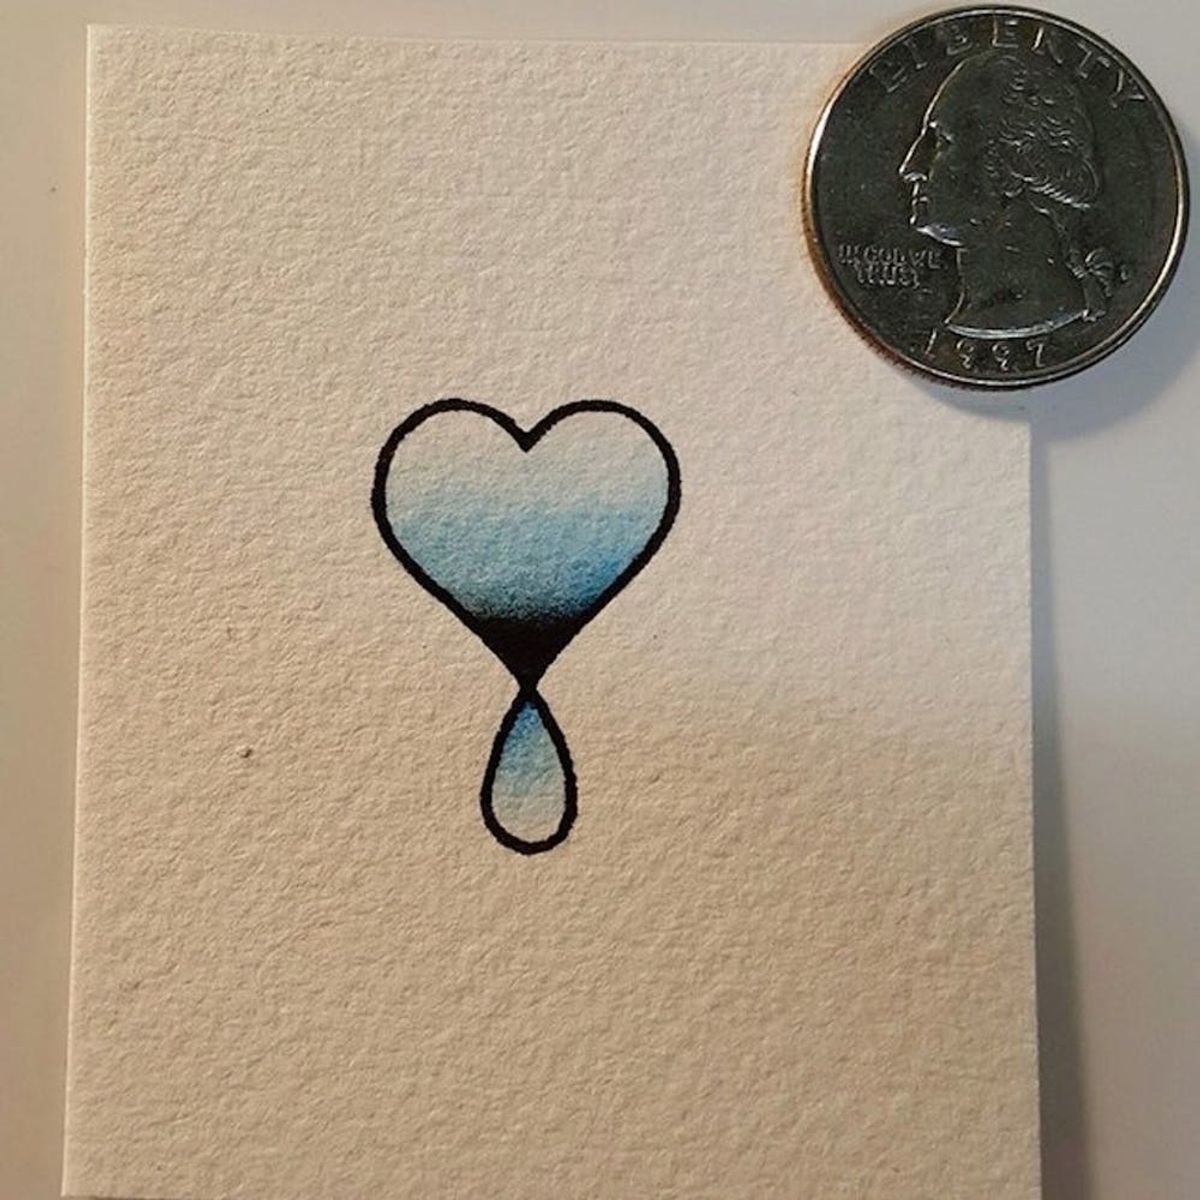 This Gorgeous Tattoo Design Supports Victims of the Flint Water Crisis